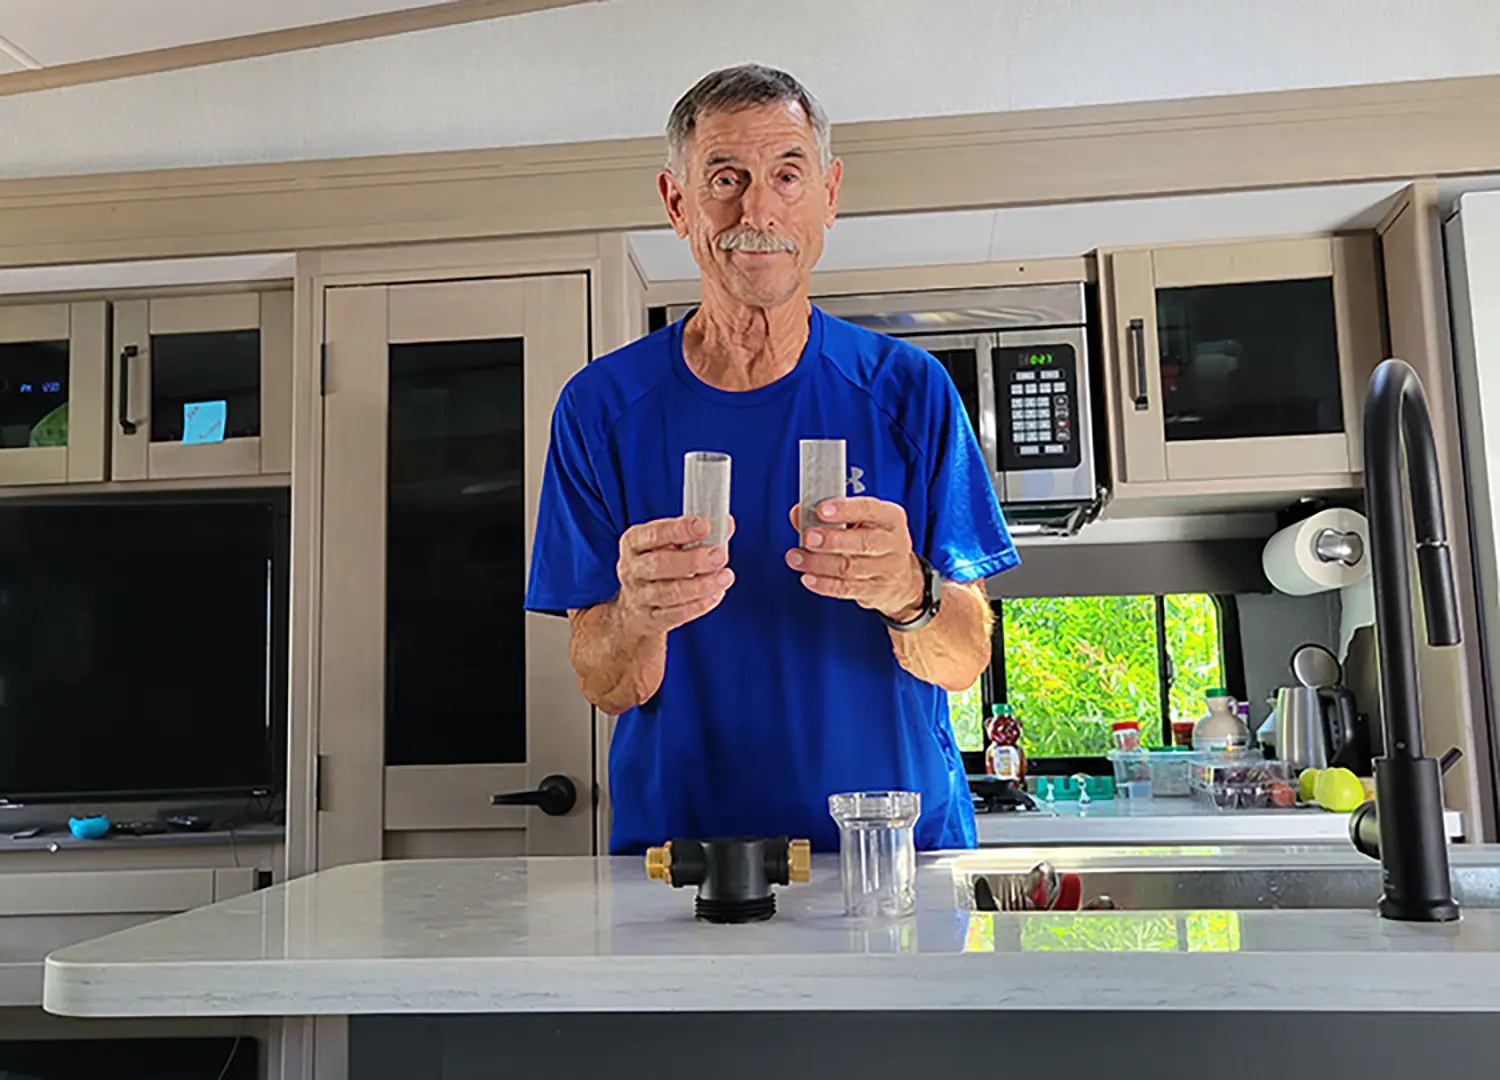 Indoor RV close-up photograph perspective of Bill Gehr in a blue shirt holding small mesh screen filter tubes plus The Twinkle Star Garden Hose Filter Attachment product with the attachment's transparent jar tube are located on the marble countertop as he stands nearby the sink area